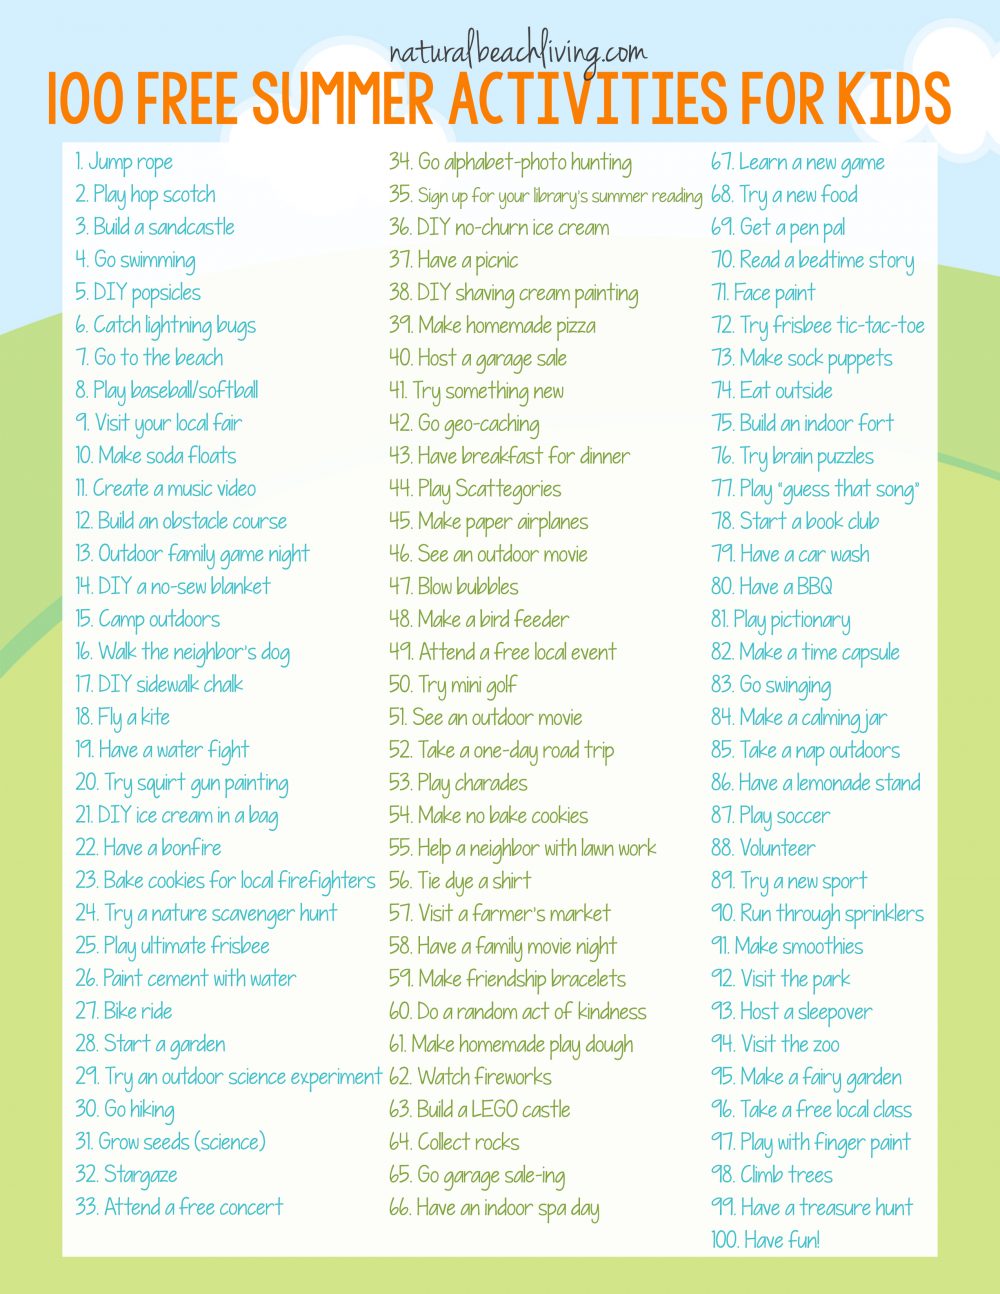 100 Free Summer Activities For Kids (free printable)